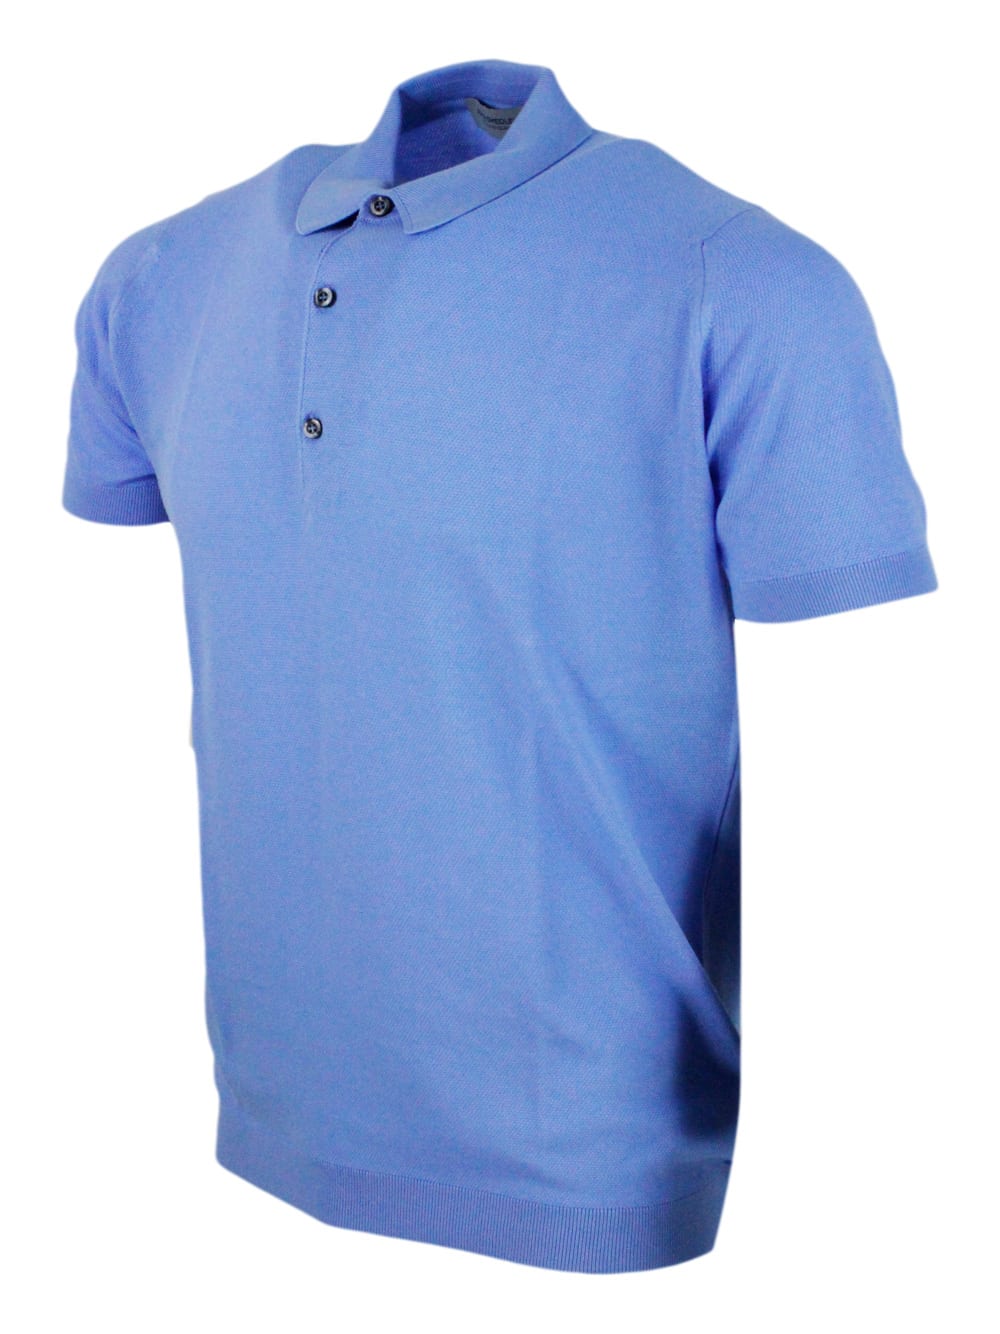 john smedley short-sleeved polo shirt in extrafine piqué cotton thread with three buttons